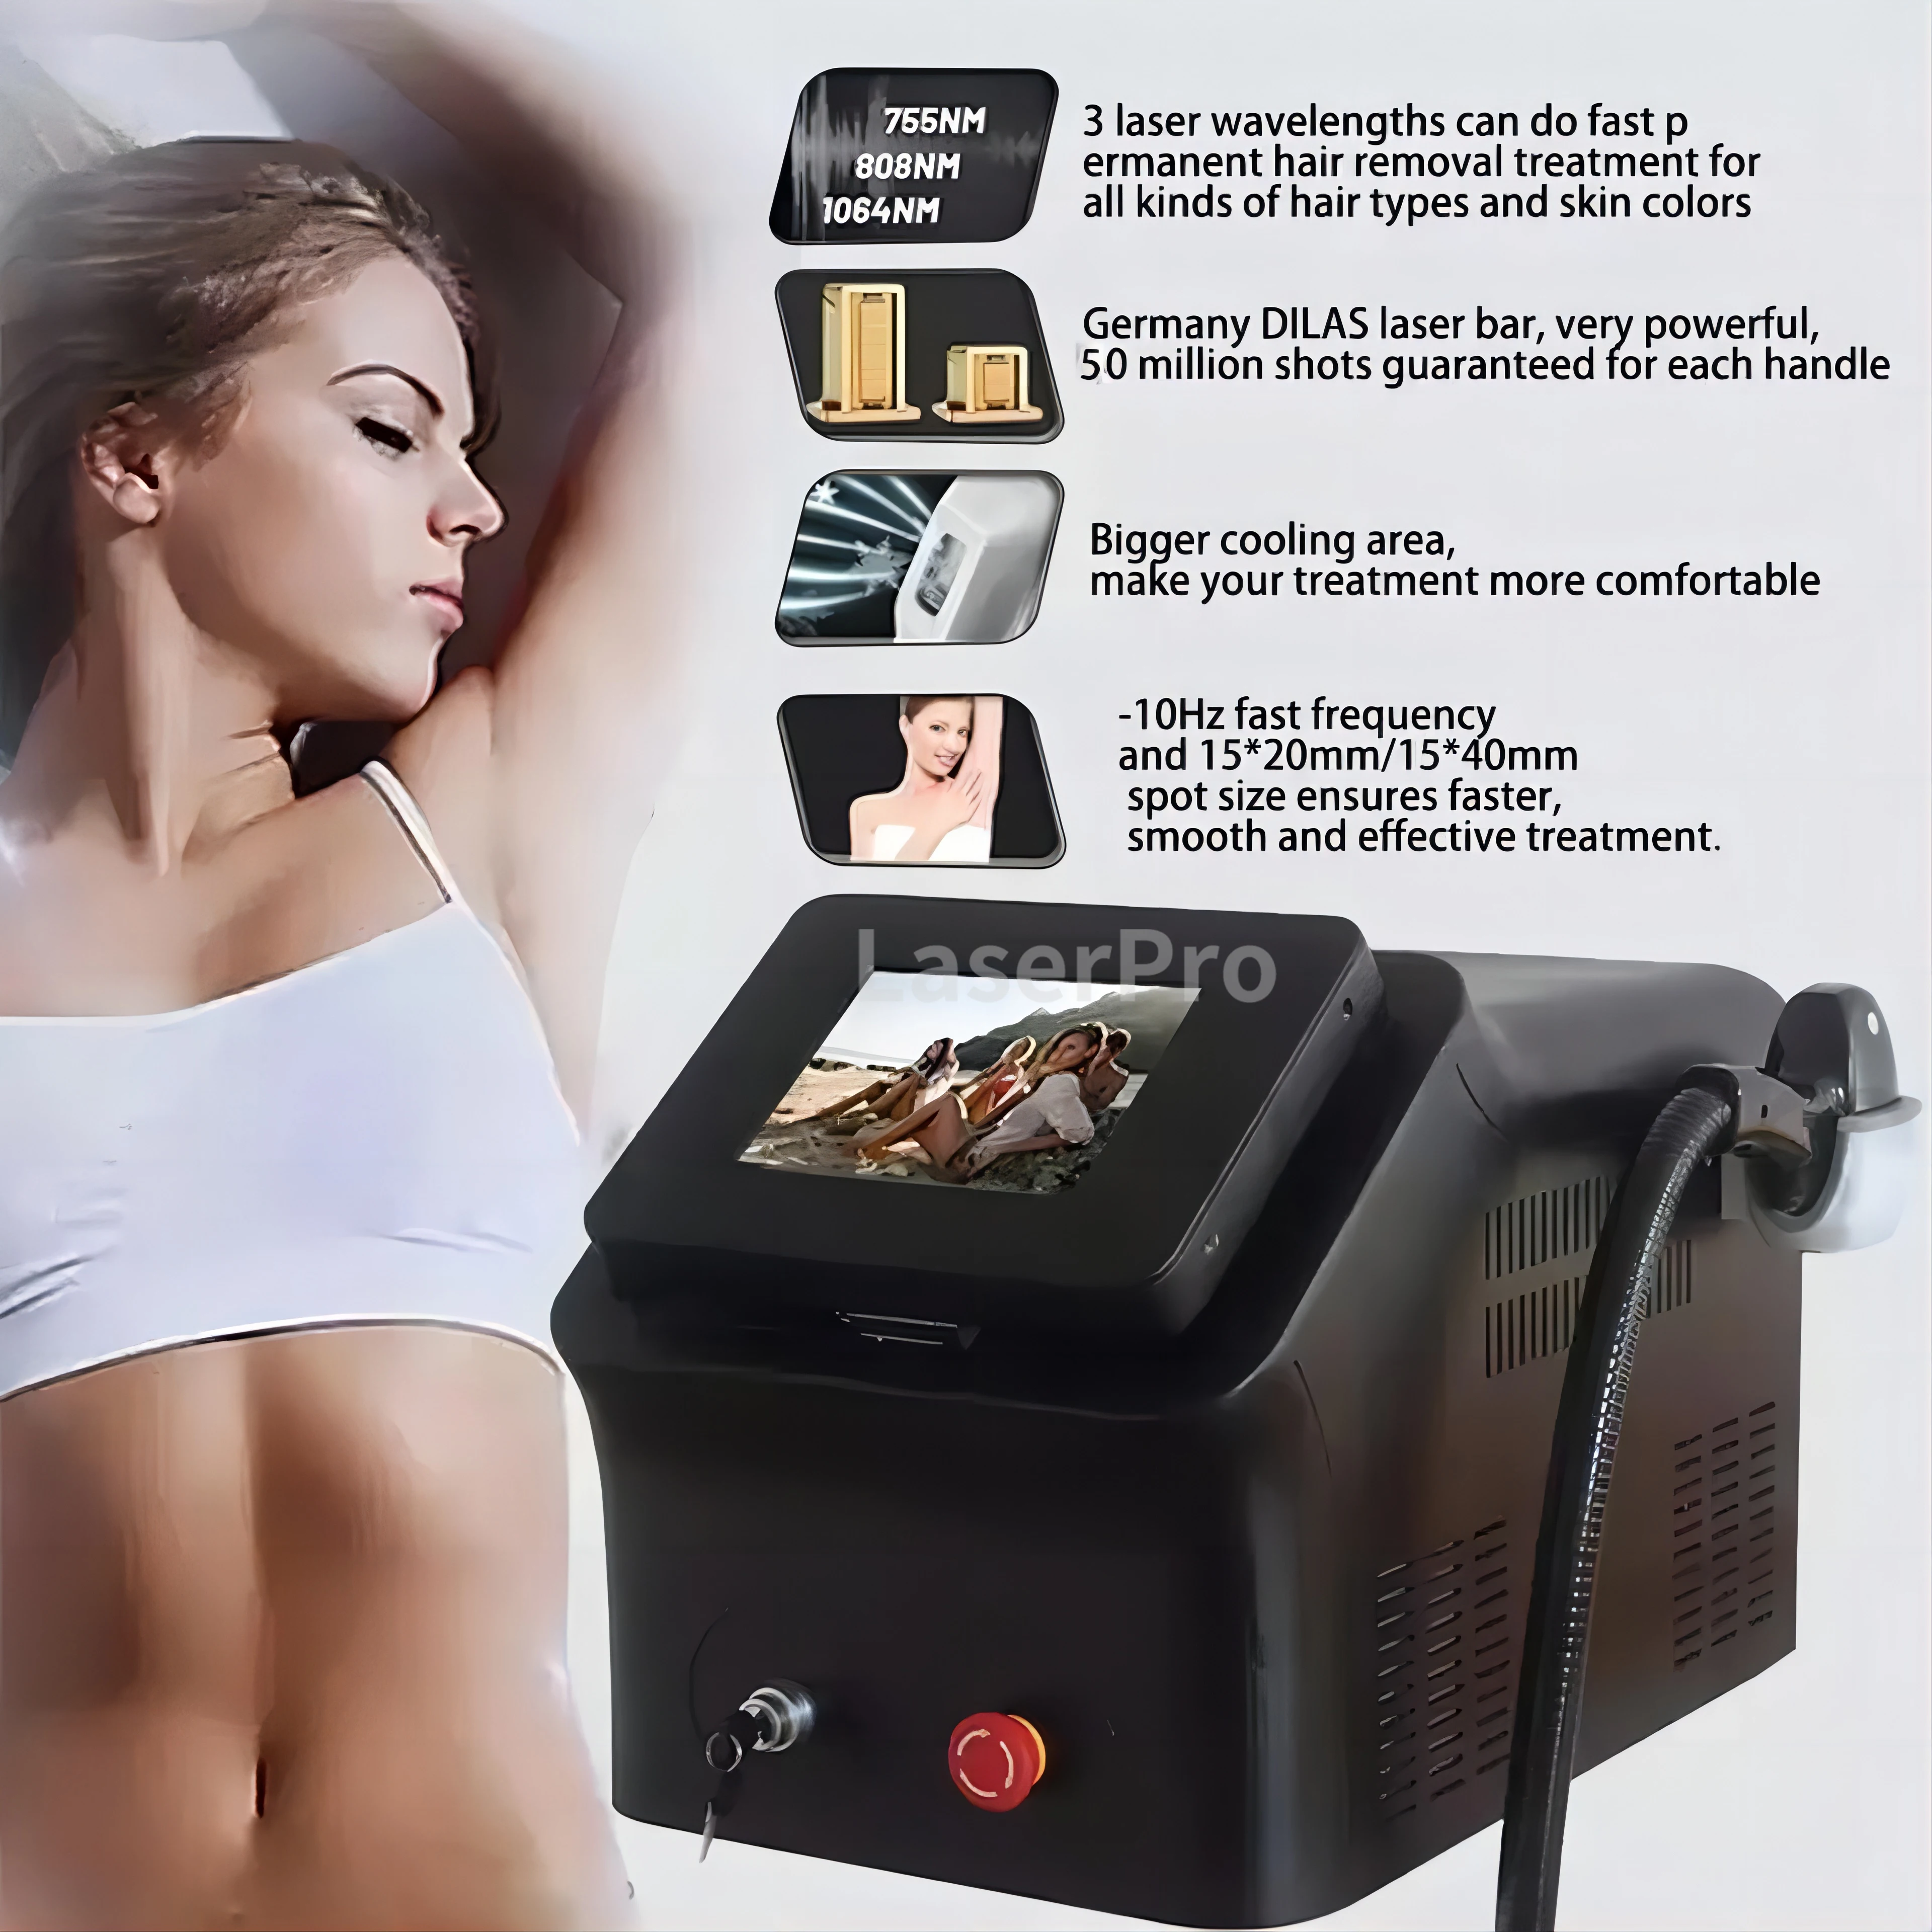 New Arrival 808nm Diode Laser Hair Removal Device Ice Titanium Painless Epilator  Depilation Fast Hair Removal Machine For Salon fast arrival kyoritsu 3146a analogue insulation tester 2 ranges 50v 125v